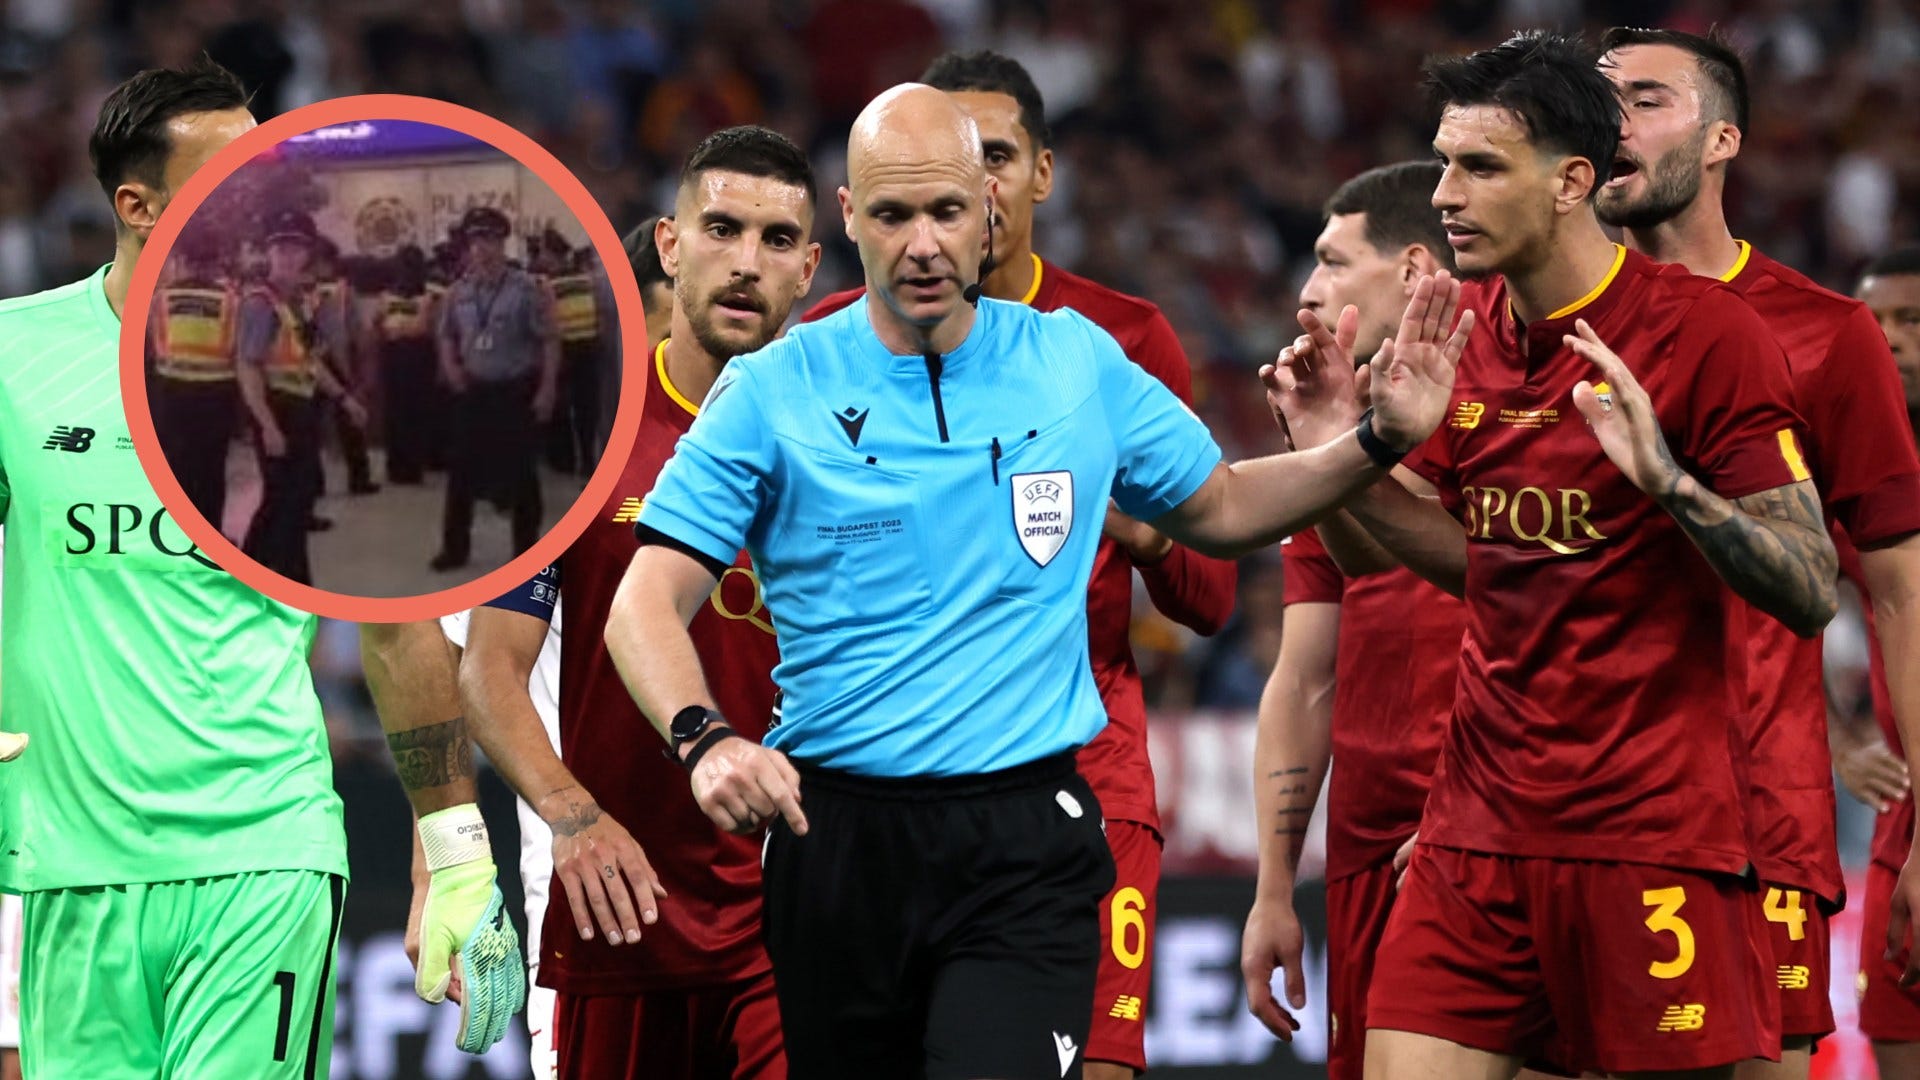 italian-fan-arrested-over-airport-attack-on-referee-antony-taylor-and-his-family-after-roma-s-europa-league-final-defeat-or-goal-com-india